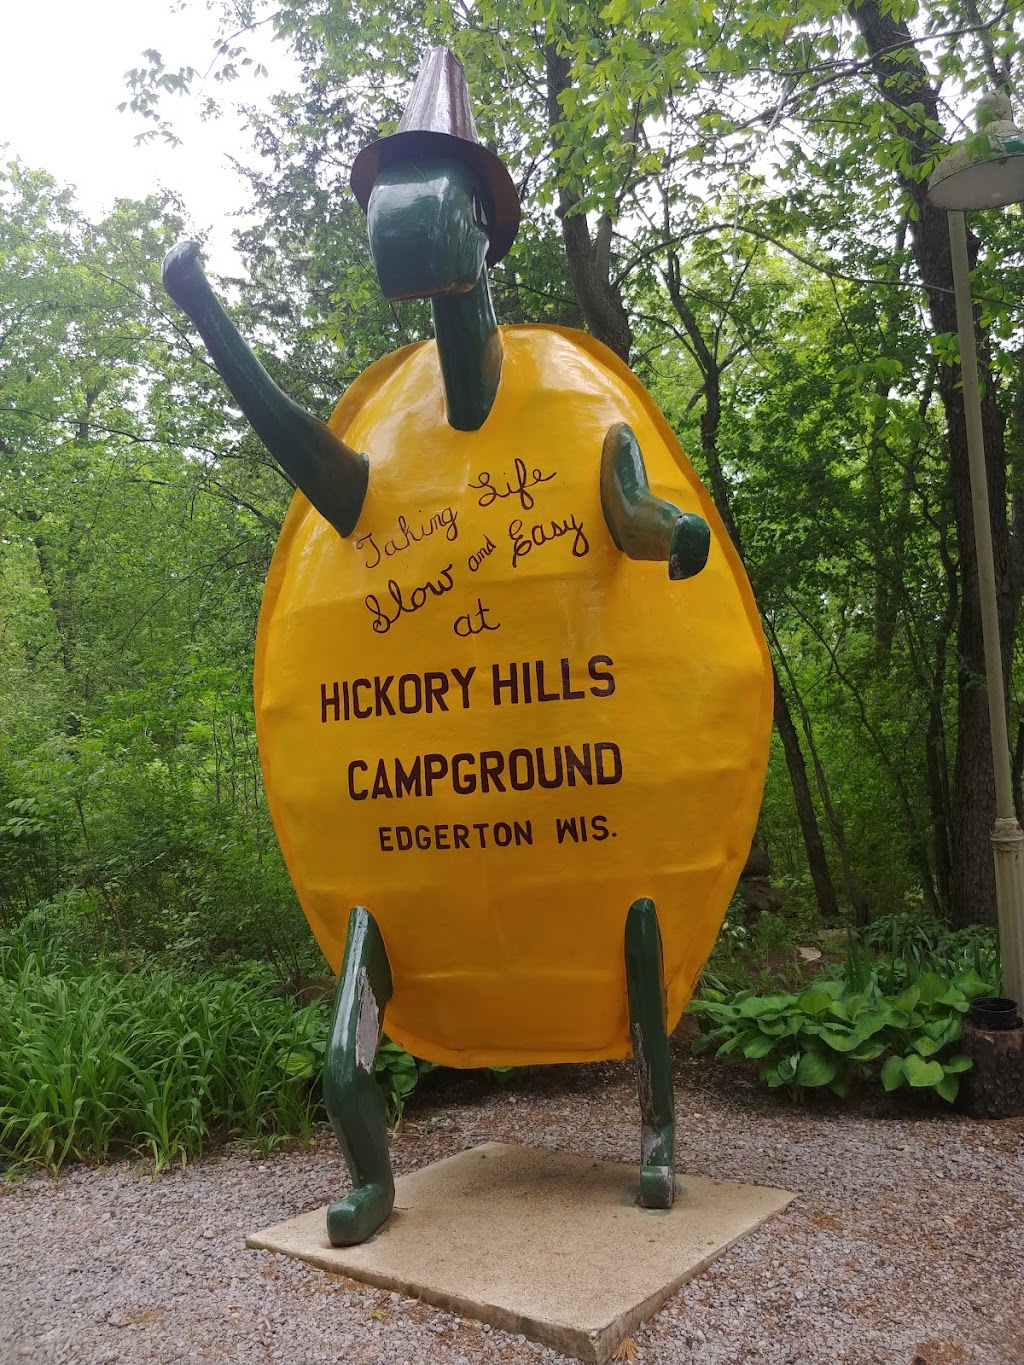 Hickory Hills Campground - campground  | Photo 8 of 10 | Address: 856 Hillside Rd, Edgerton, WI 53534, USA | Phone: (608) 884-6327